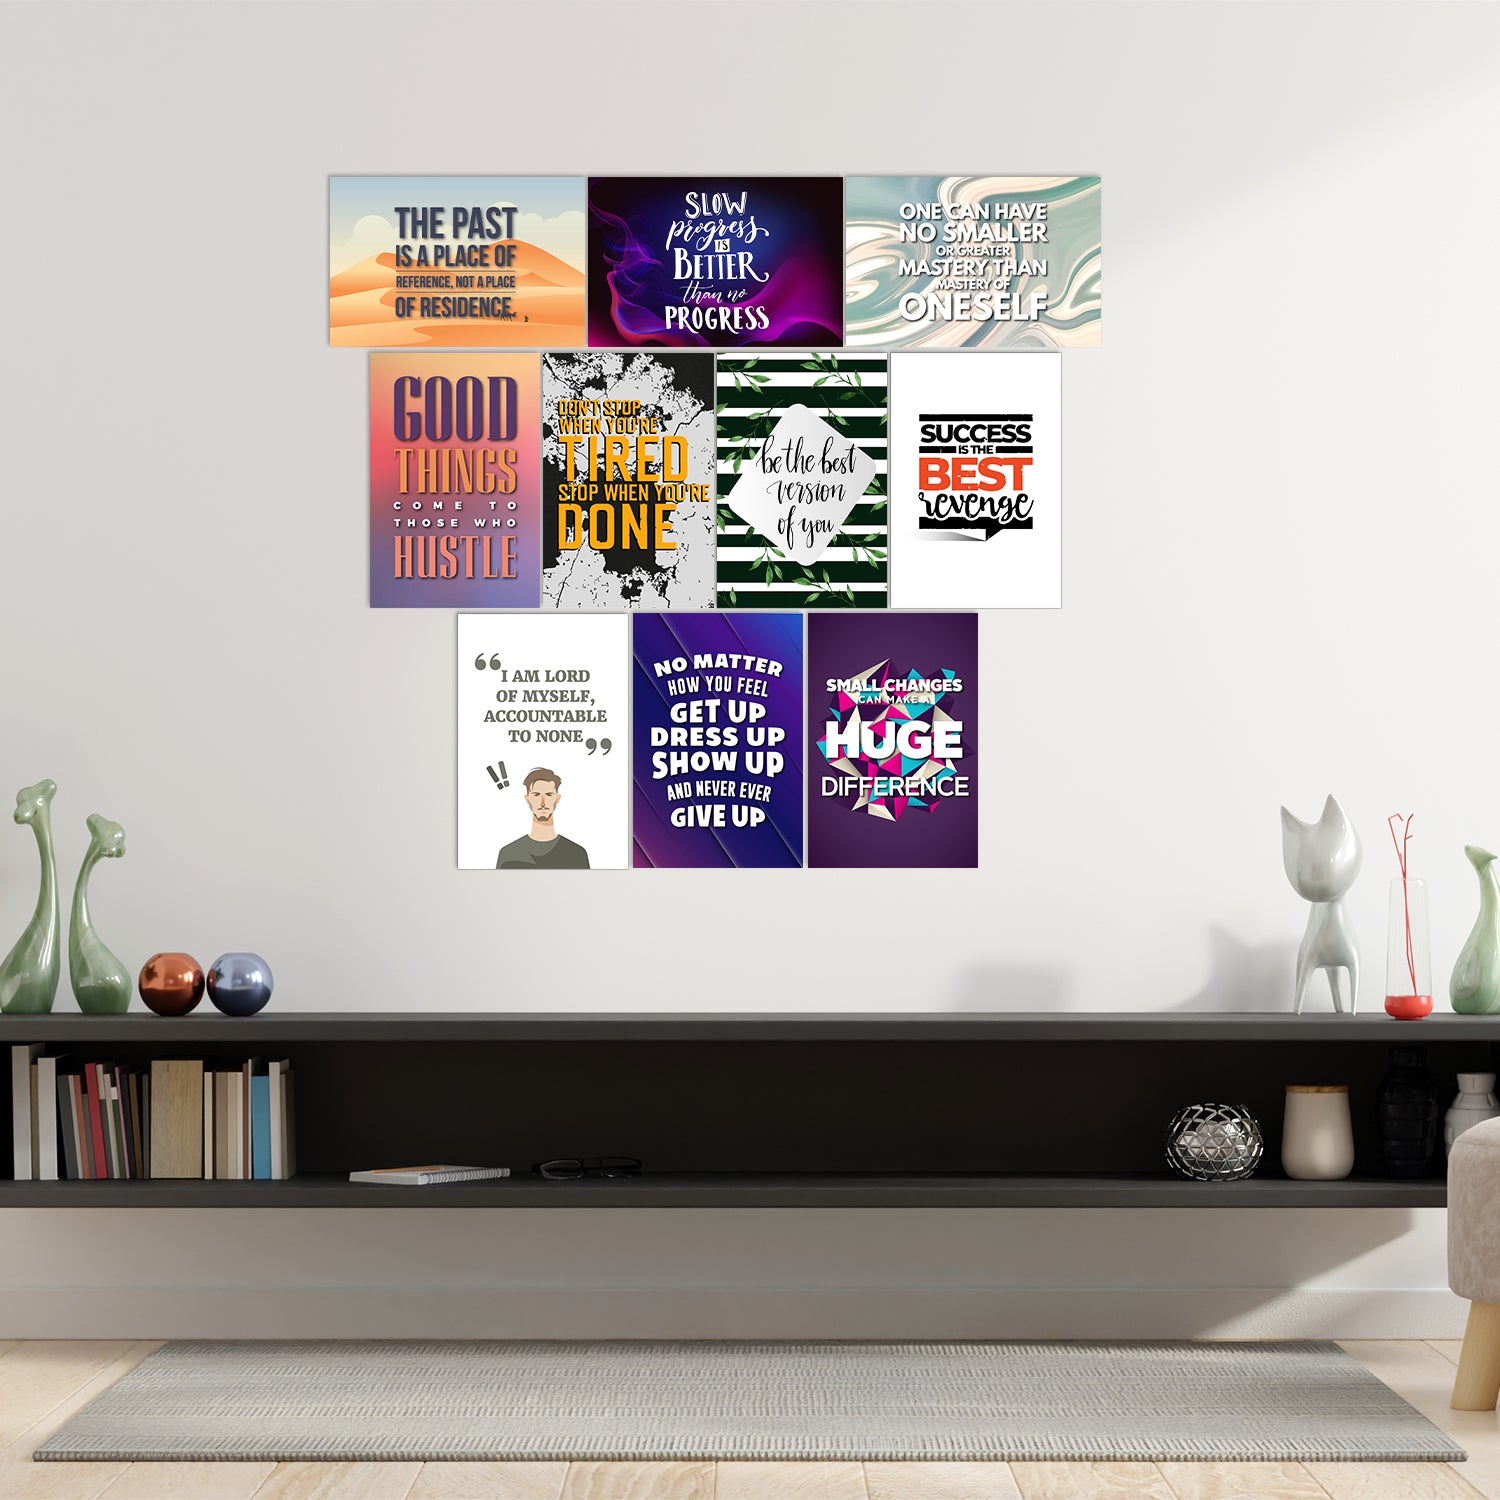 Set of 10 Motivating and Inspiring Quotes High Quality Printed 300 GSM Posters with Glue Drops